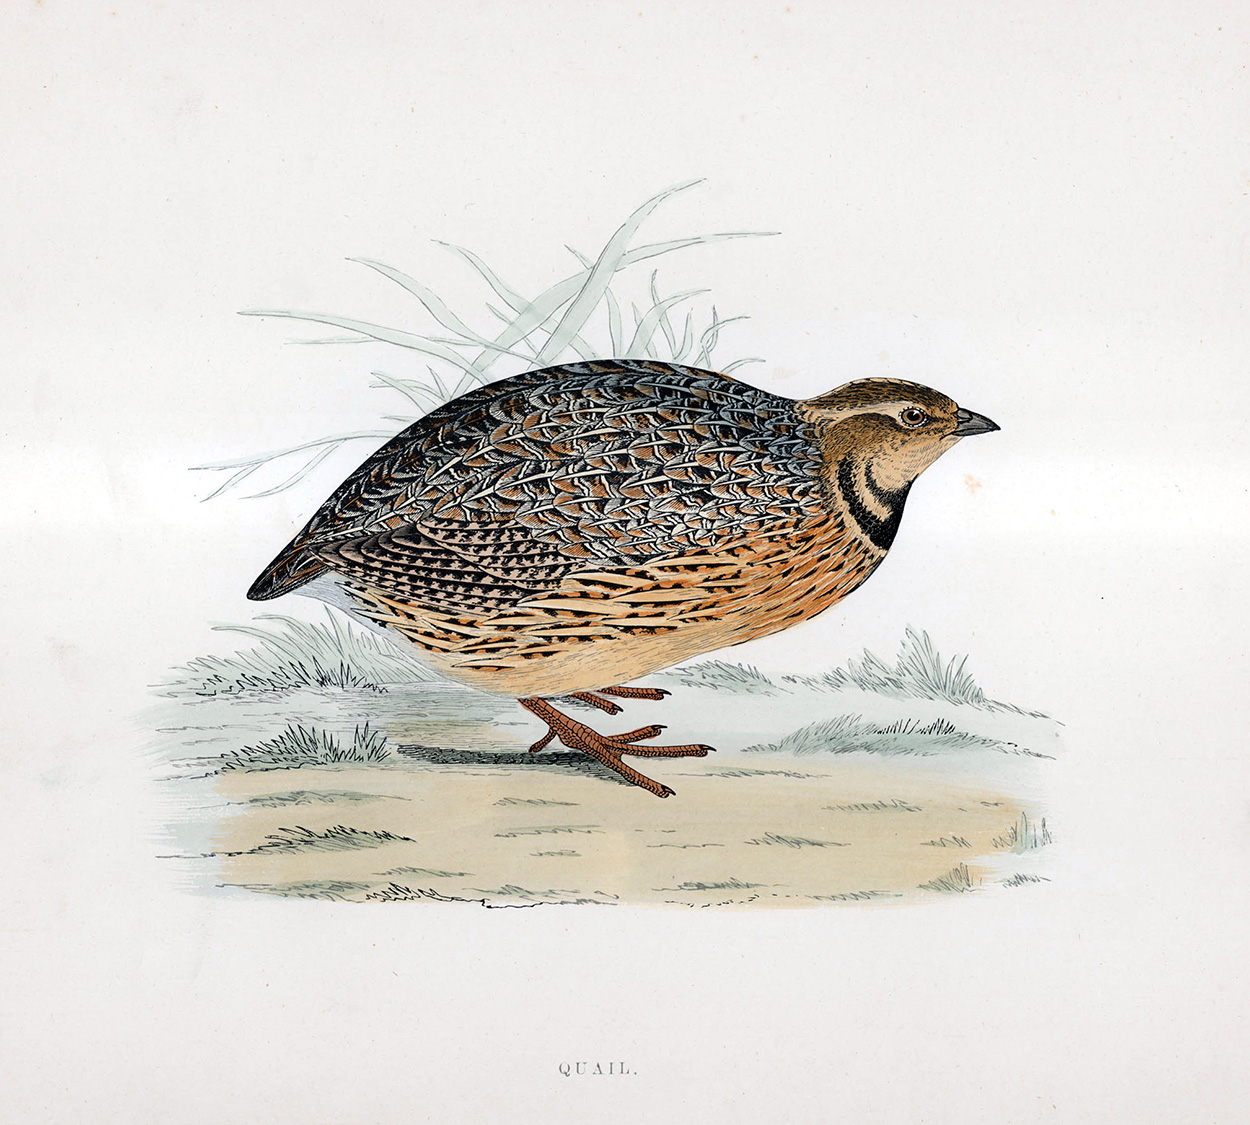 Quail - hand coloured lithograph 1891 (Print) art by Beverley R Morris at The Illustration Art Gallery